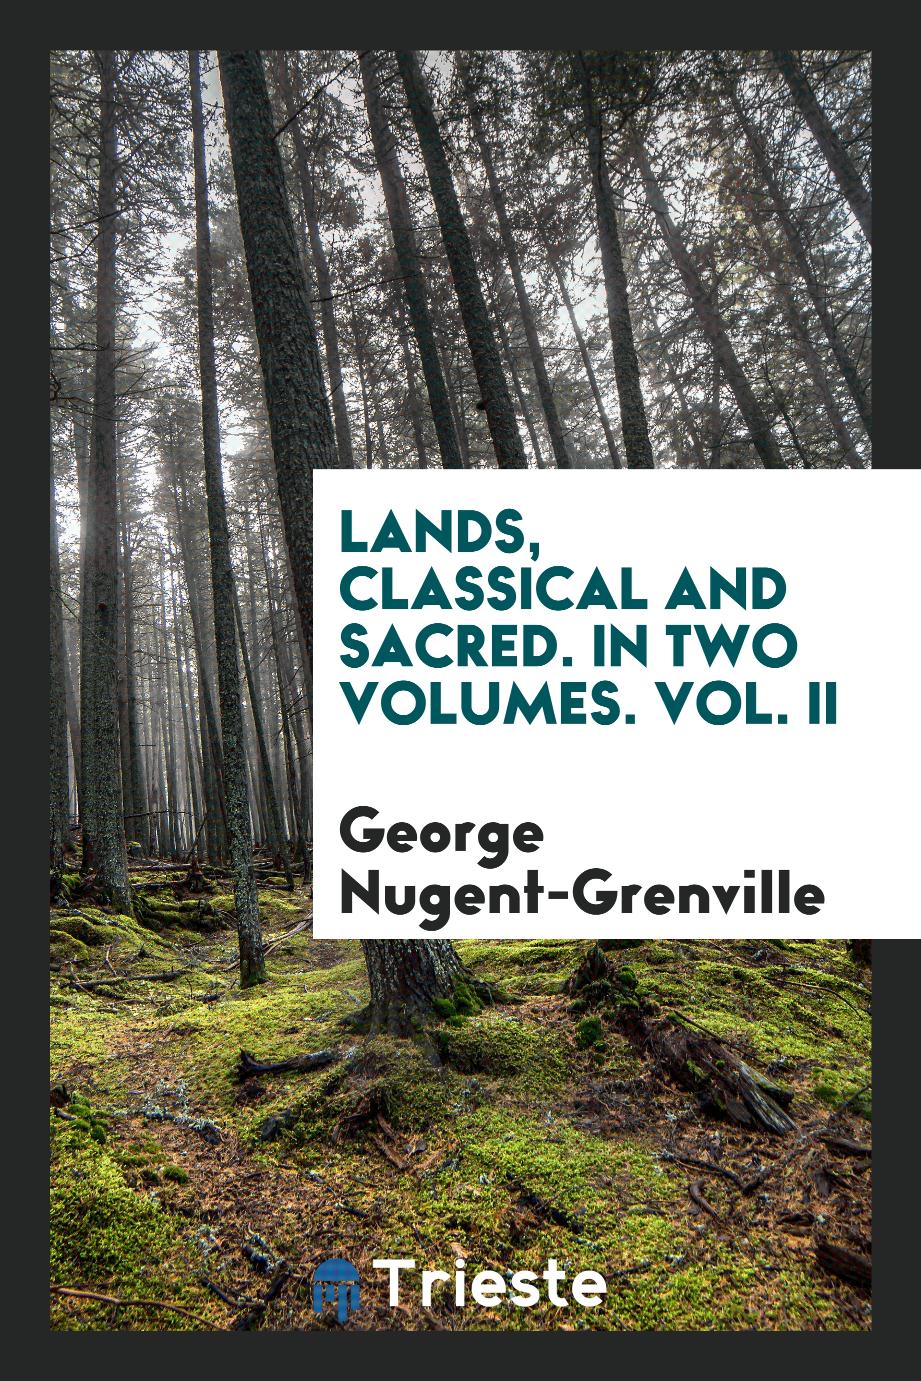 Lands, classical and sacred. In two volumes. Vol. II